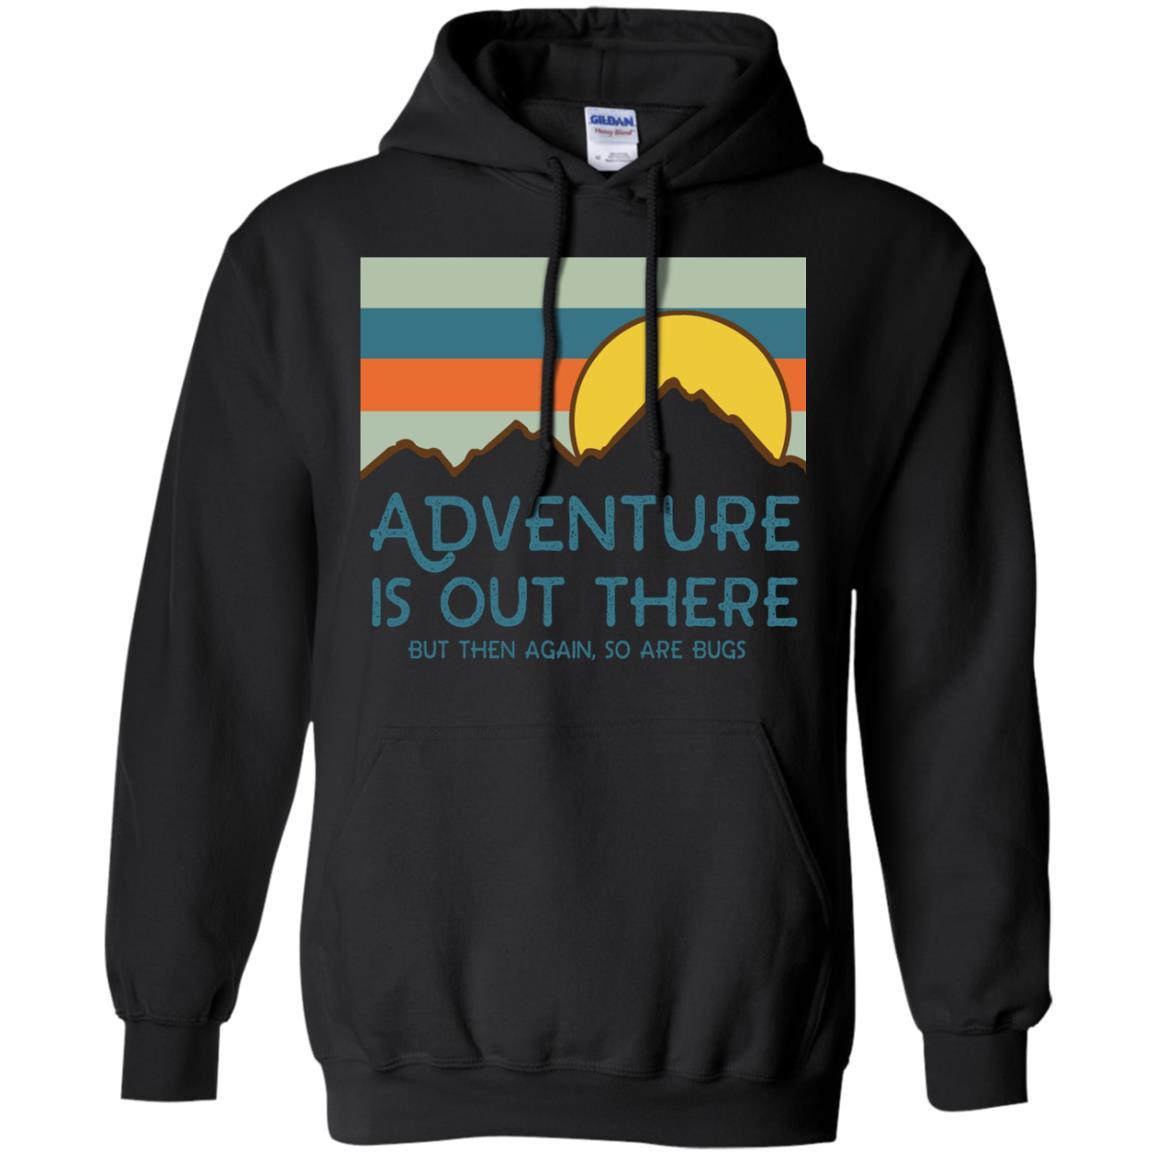 Adventure Is Out There But Then Again - So Are Bugs Shirt